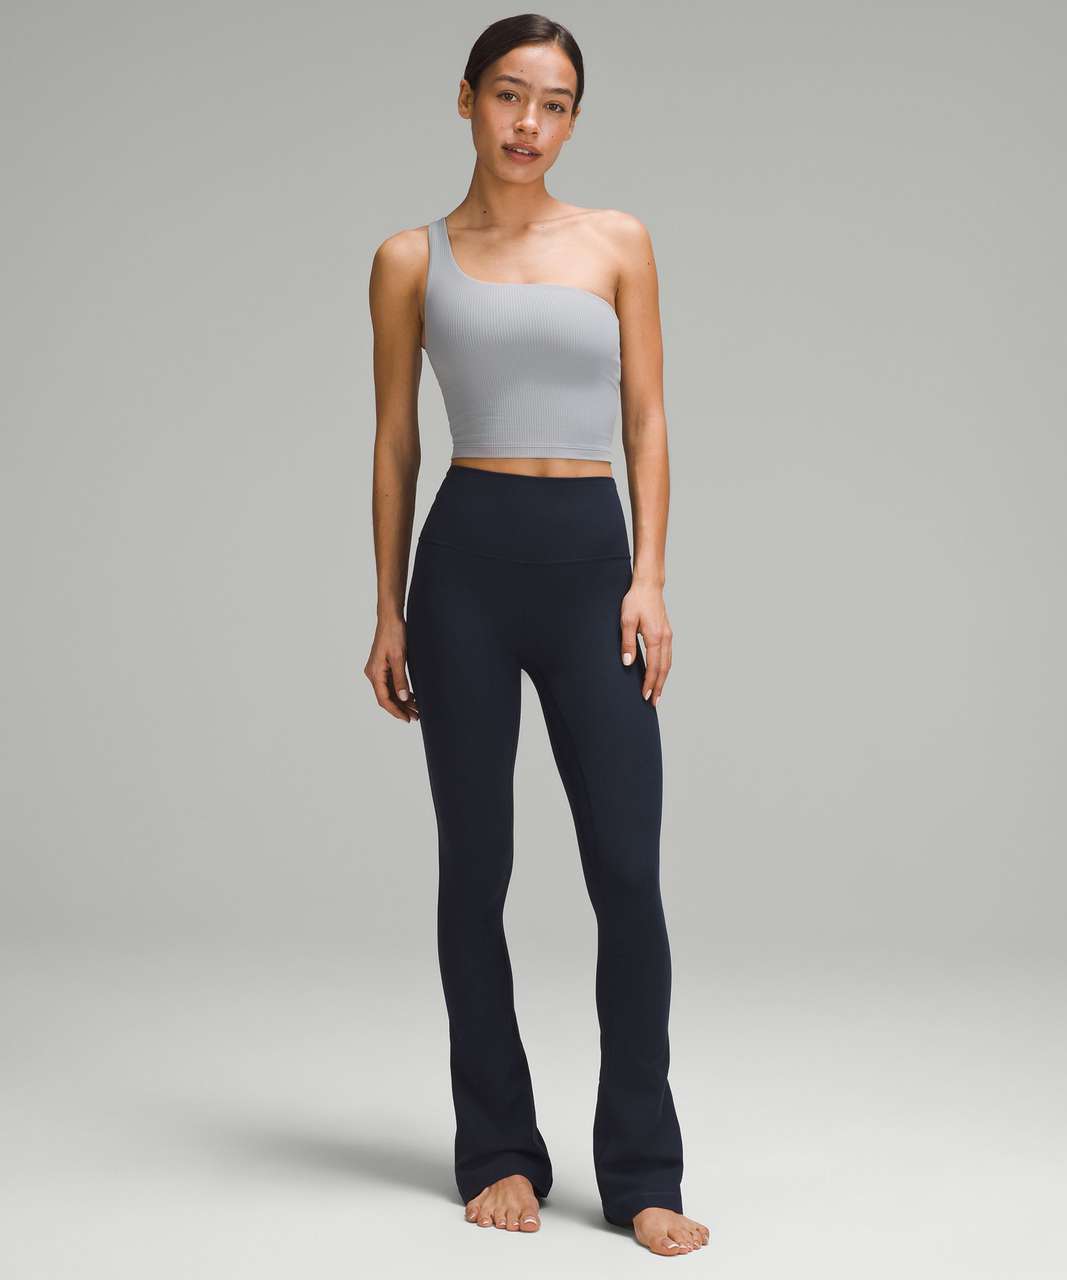 4 Faves & a Dud + Quick Fit Review: lululemon Align Mini Flare Pant